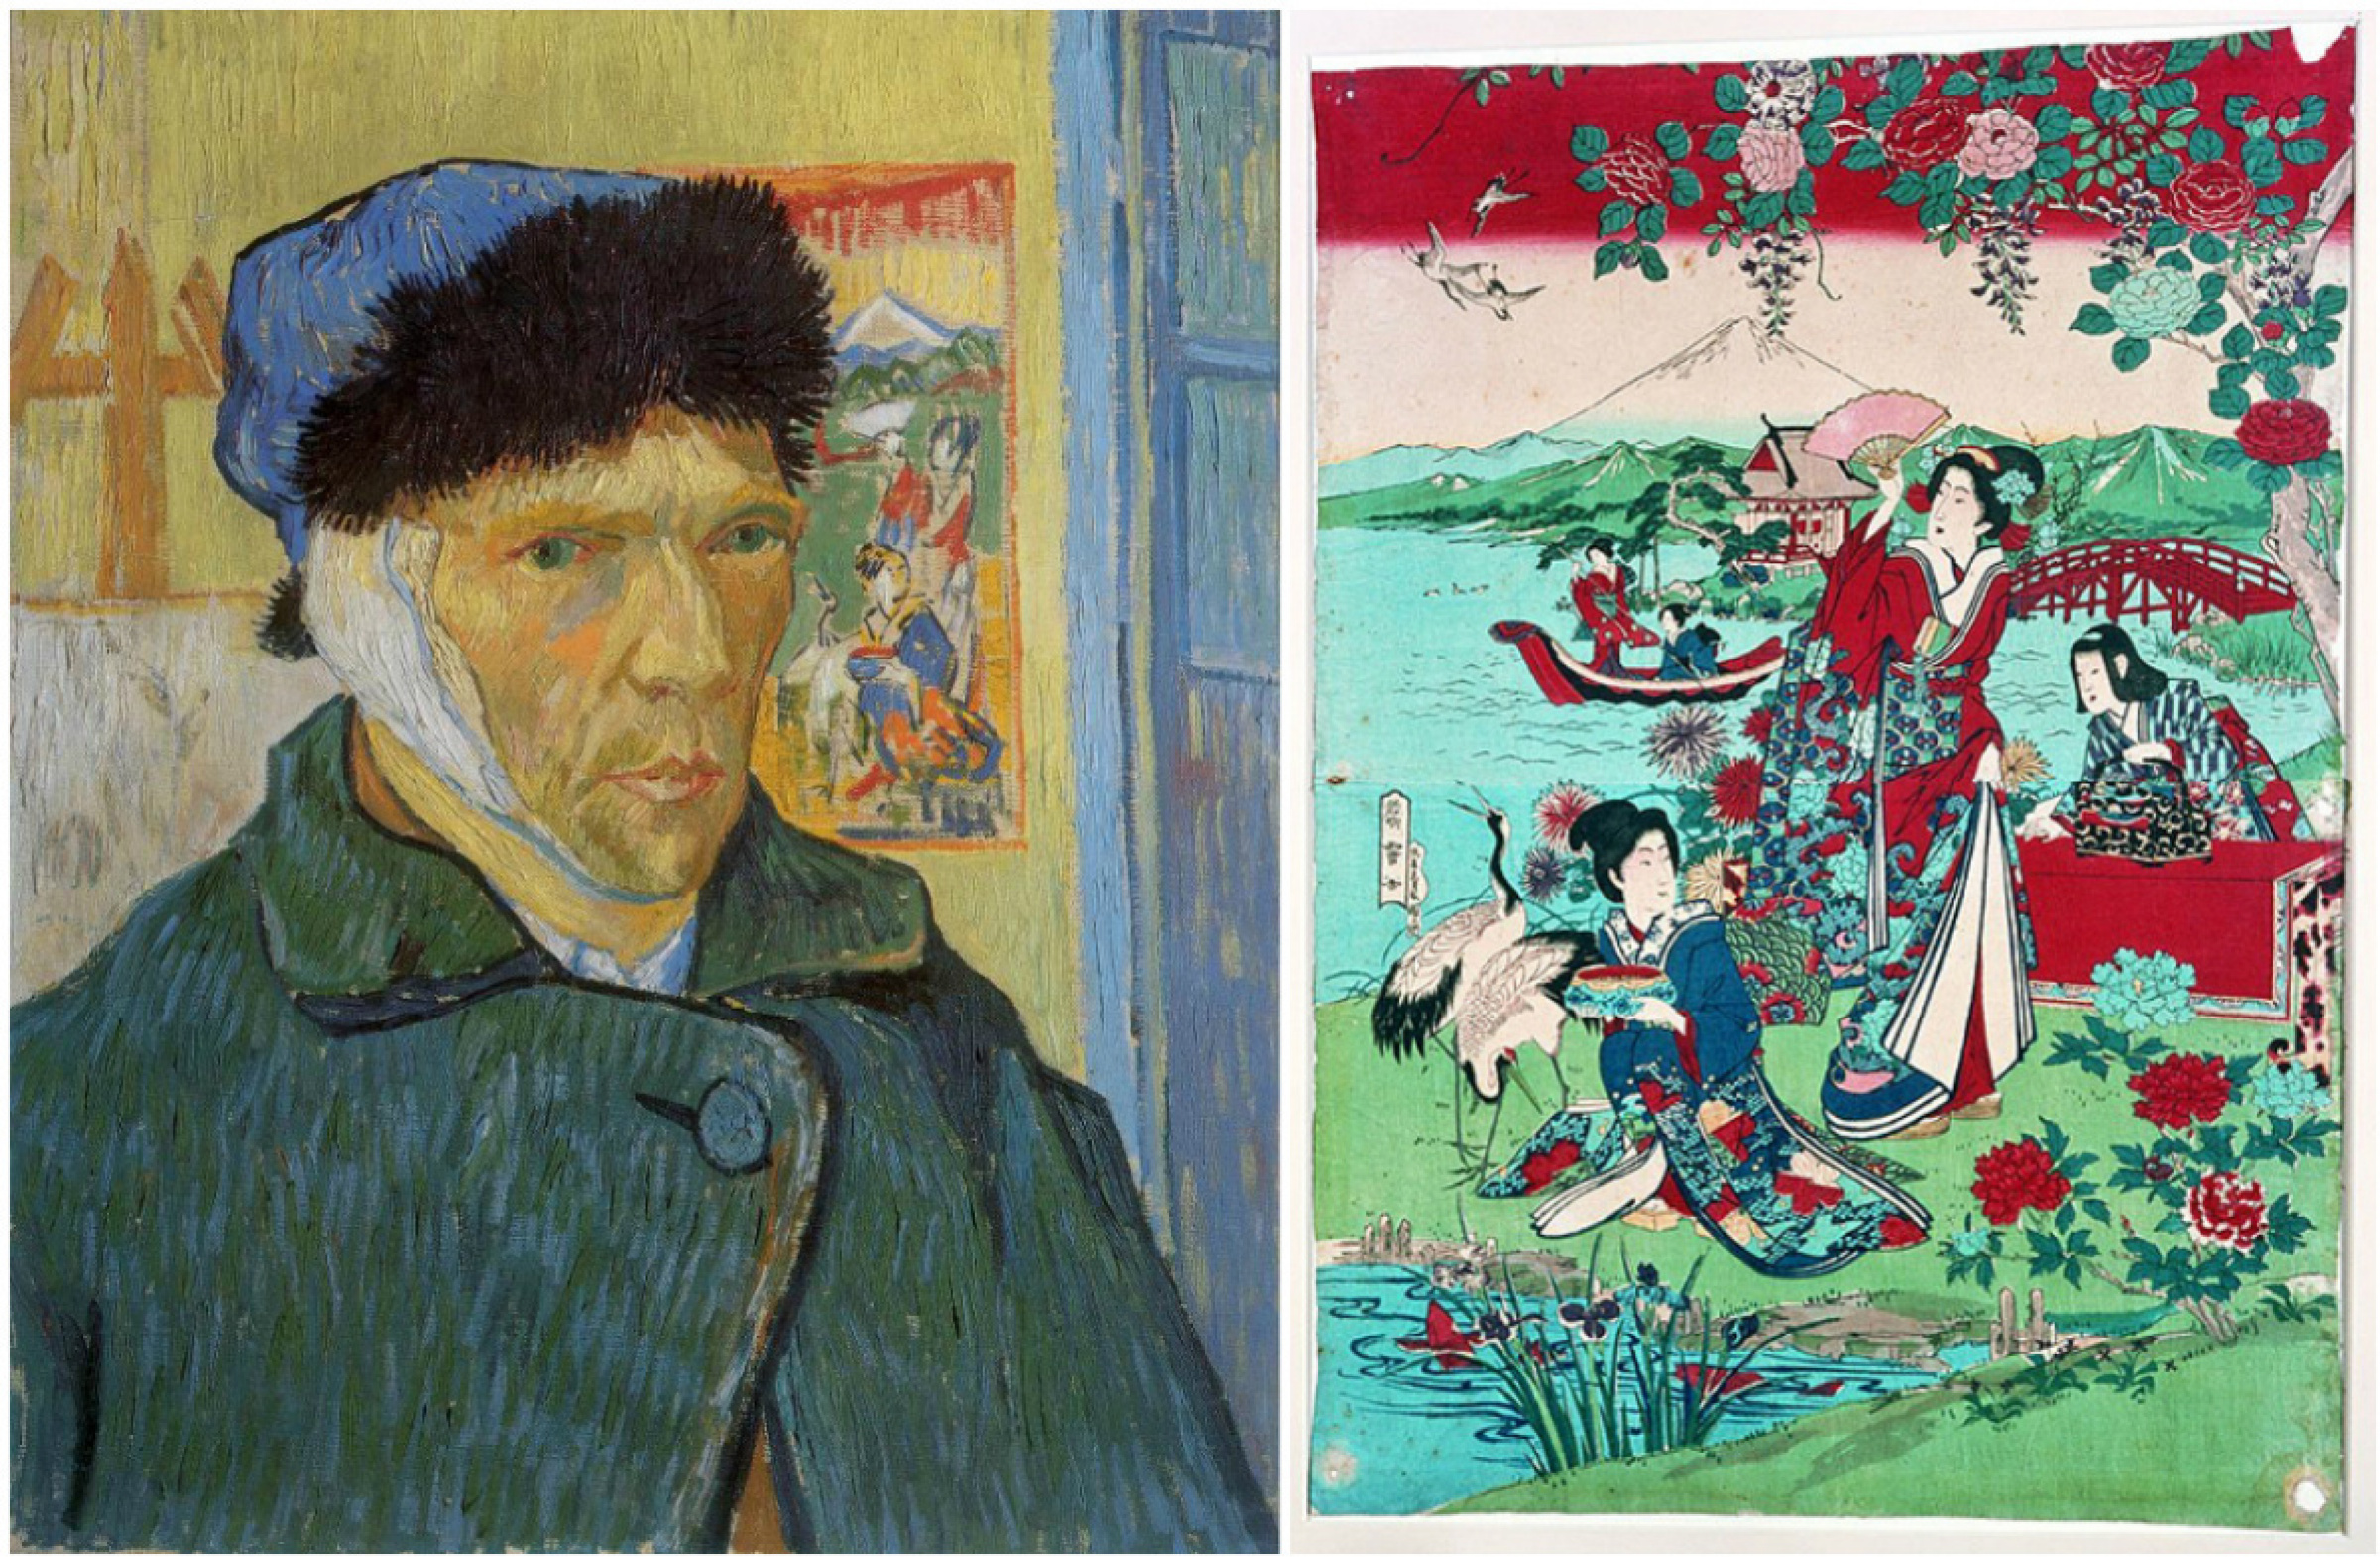 Van Gogh and Japan: the fascination that changed Vincent's style